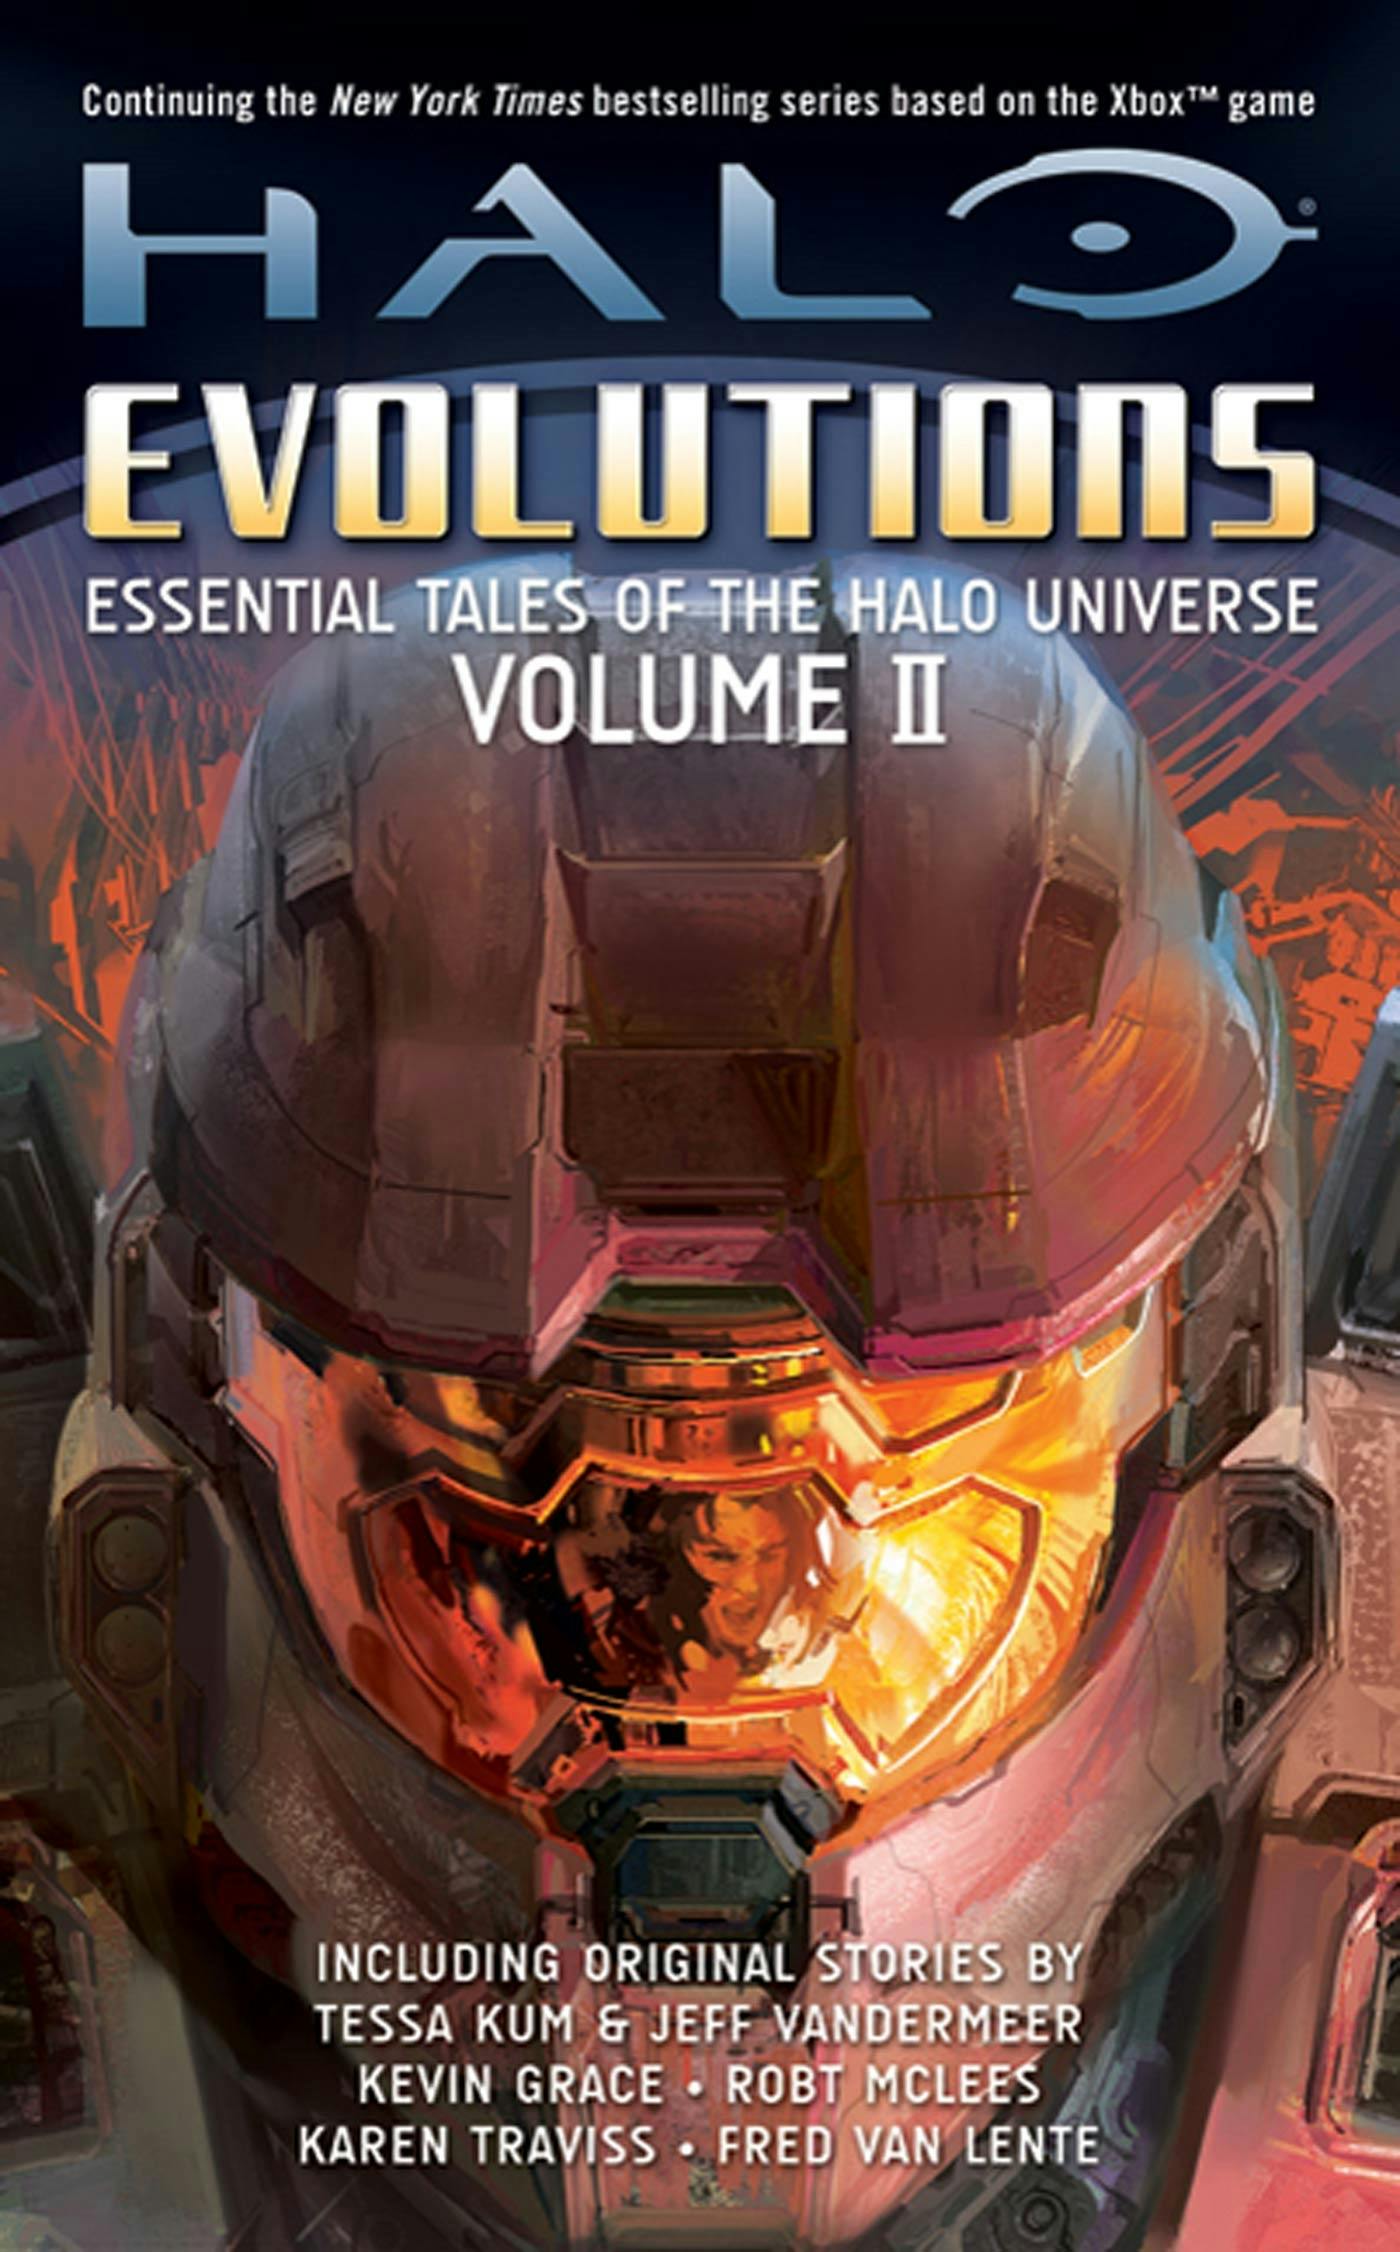 Cover for the book titled as: Halo: Evolutions Volume II